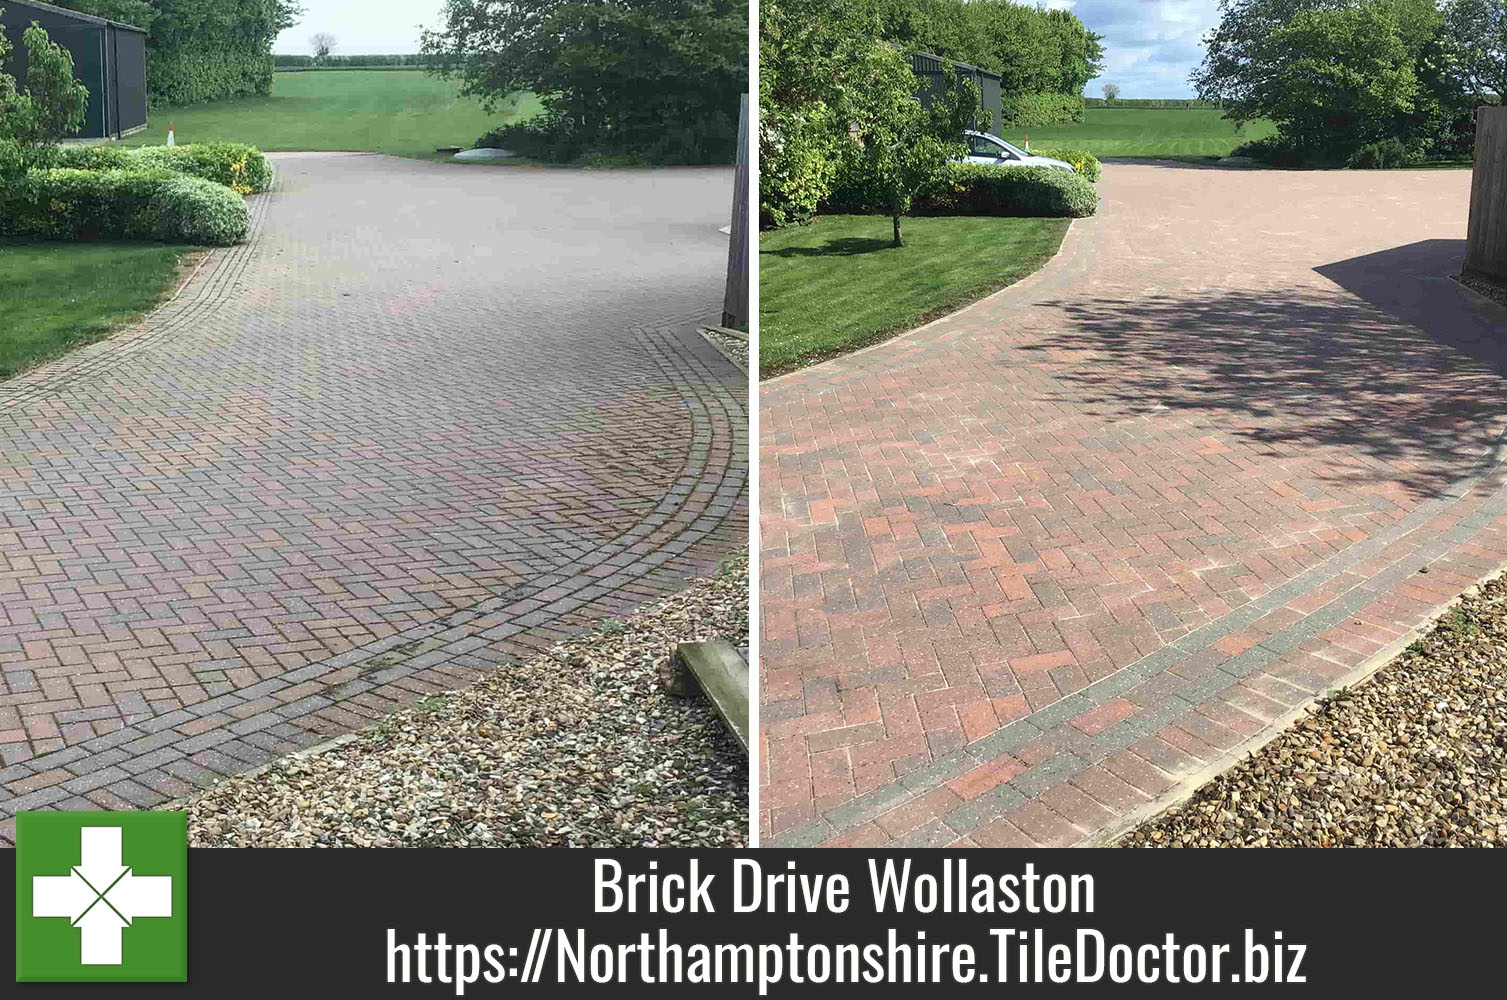 Tile Doctor Brick Driveway Cleaner used to Renovate Block Paved Driveway in Wollaston Northamptonshire